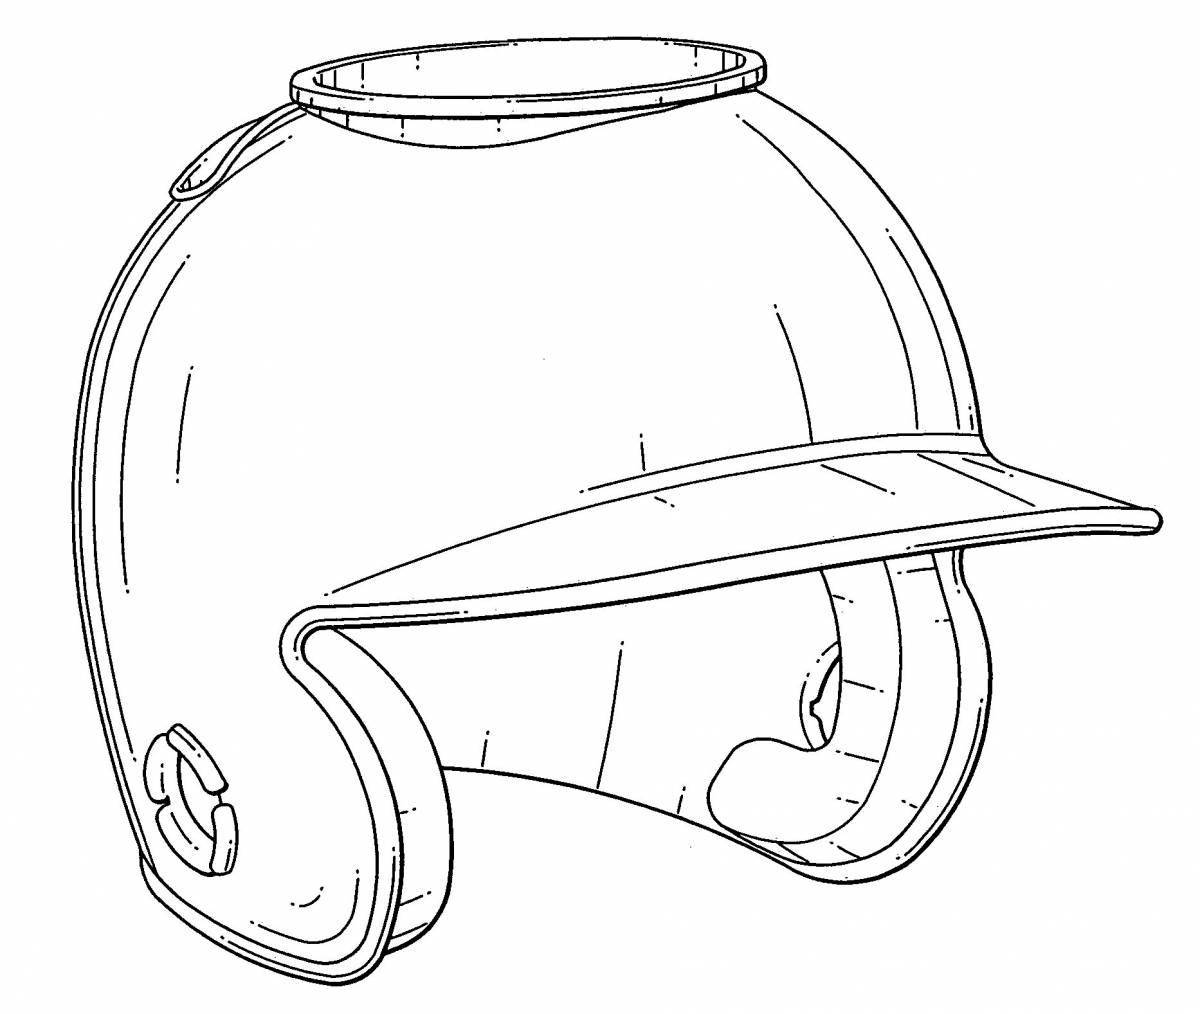 Soldier's helmet coloring page